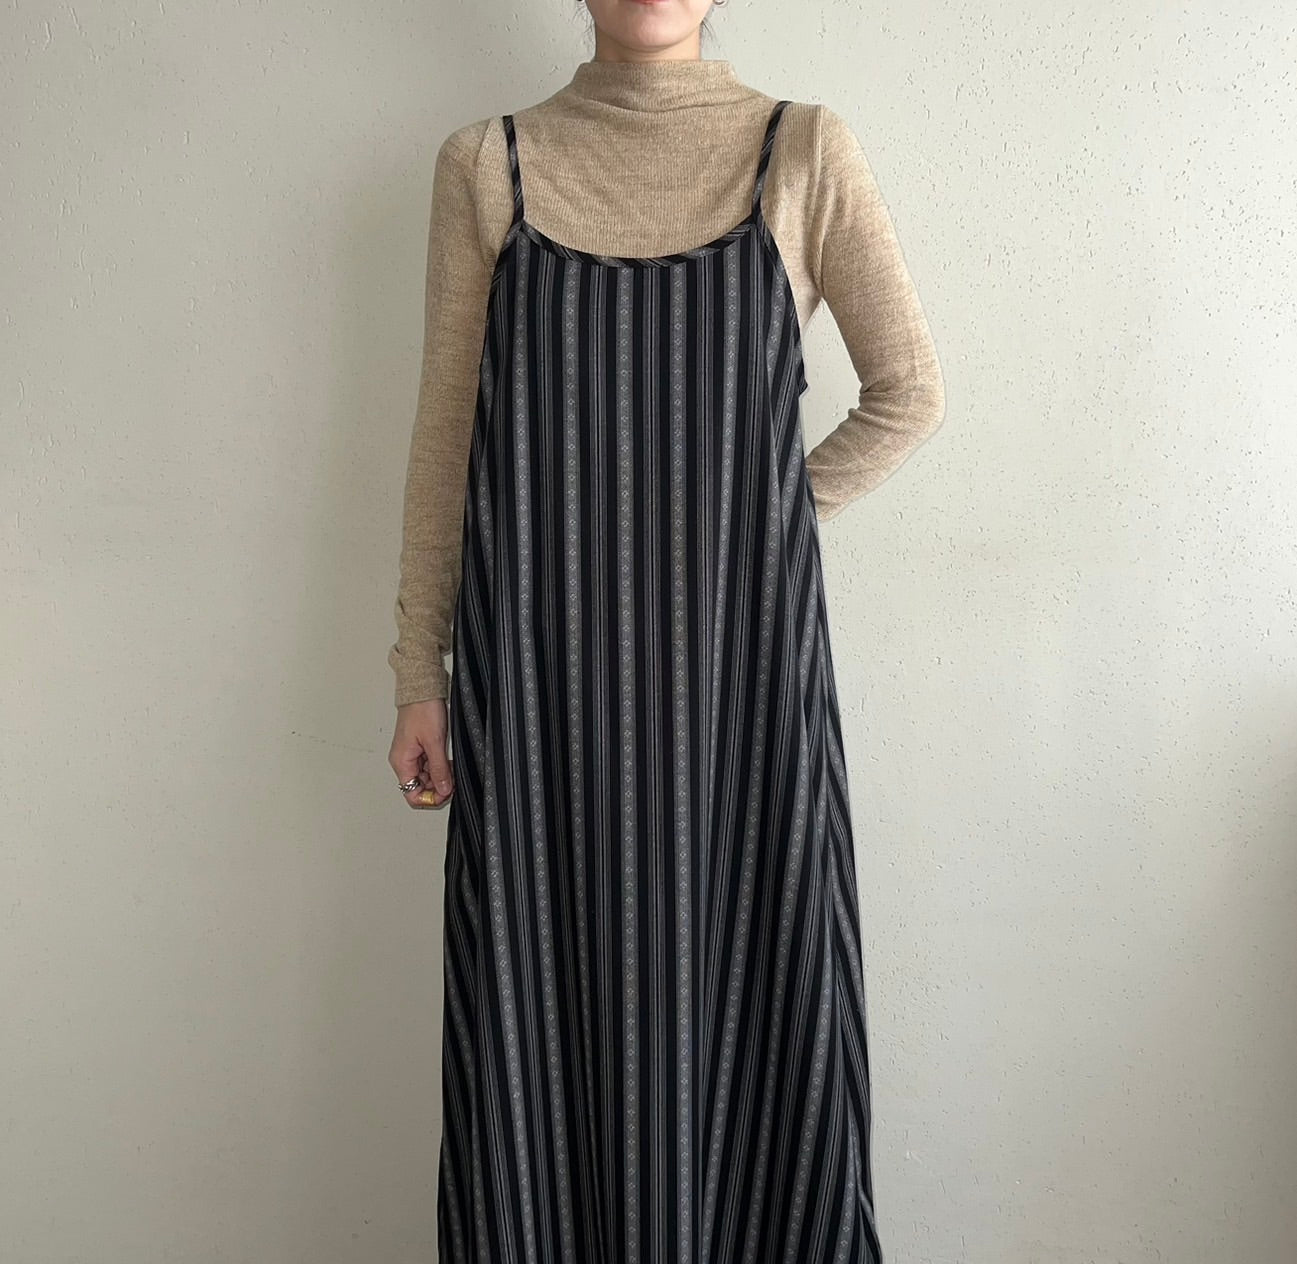 90s Striped  Dress Made in USA